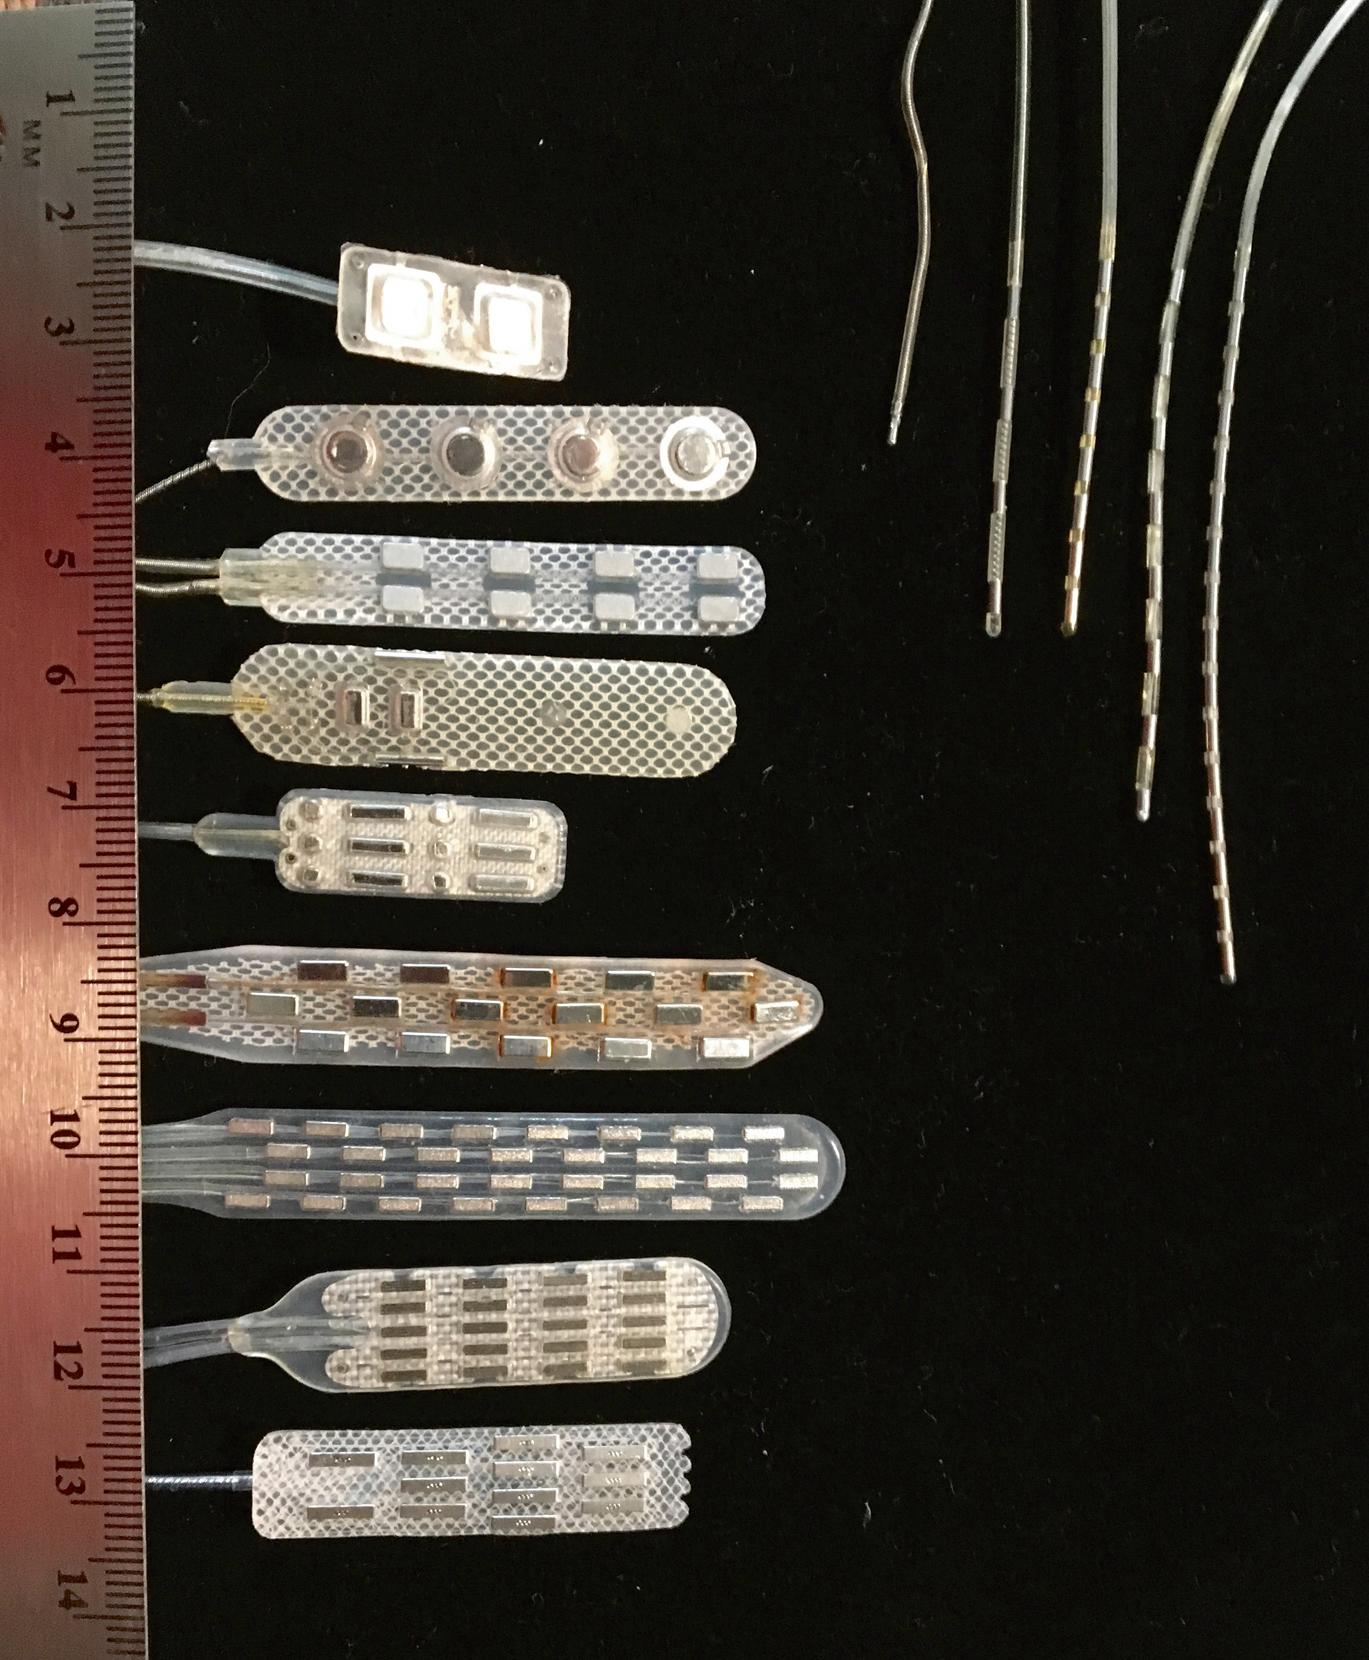 FIGURE 119.8, Spinal cord stimulation electrodes are arrays with multiple contacts (up to 32). Some require a limited laminectomy, and others may be inserted percutaneously through a modified Tuohy needle.